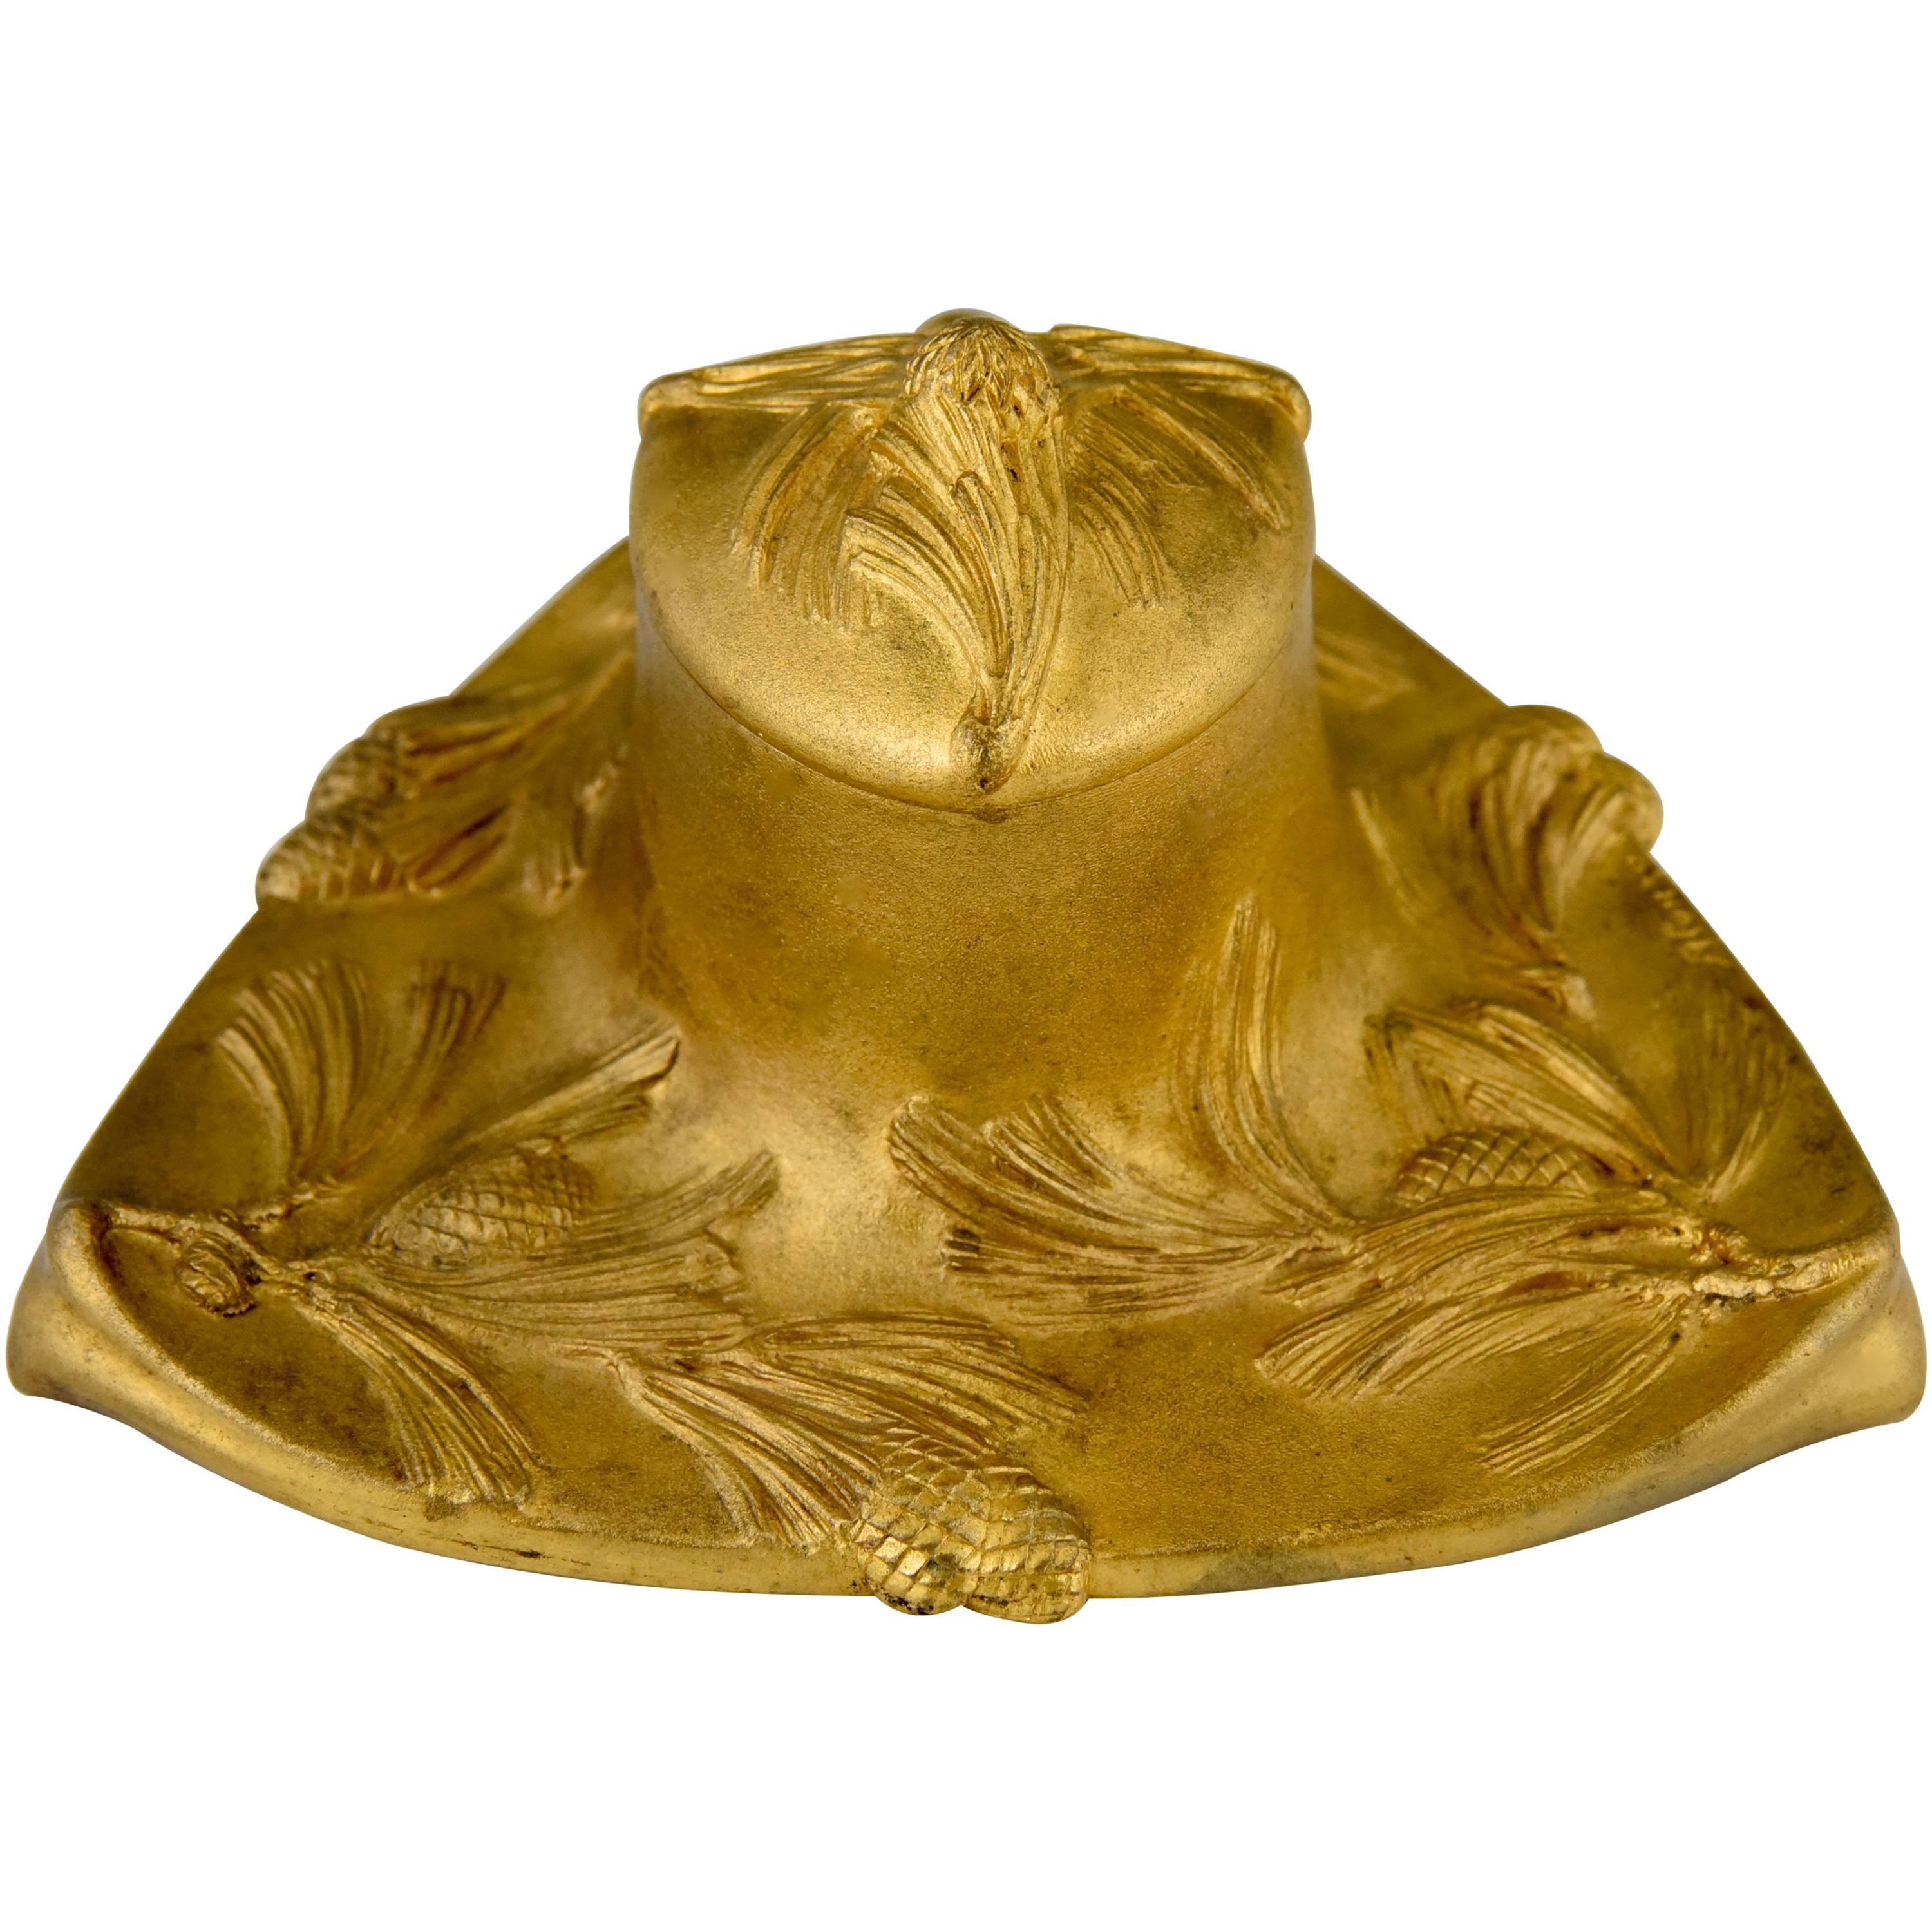 Art Nouveau Gilt Bronze Inkwell with Pine Cones by D. Alonzo